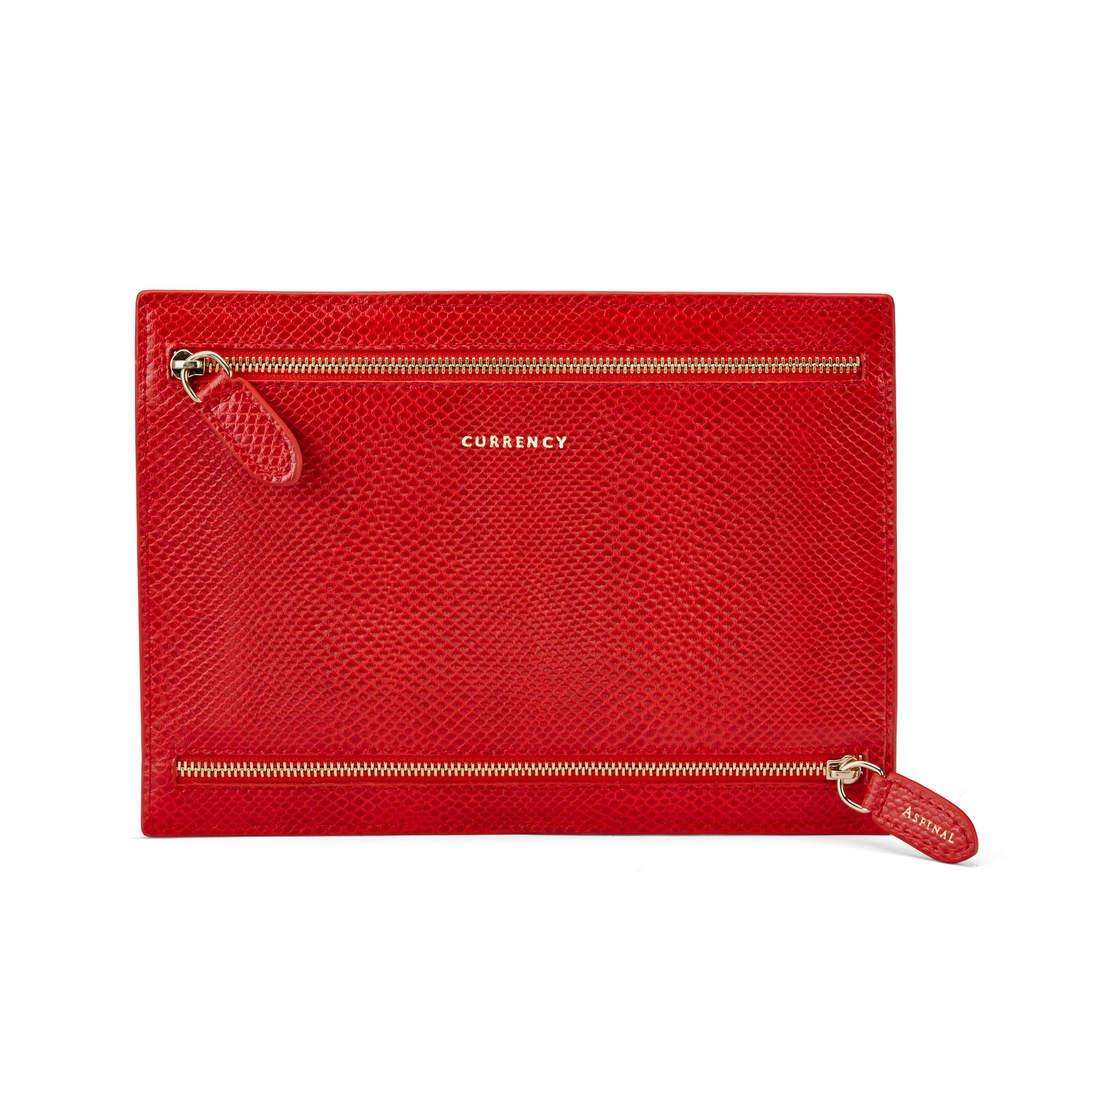 Aspinal of London Leather Multi Currency Wallet in Red - Lyst